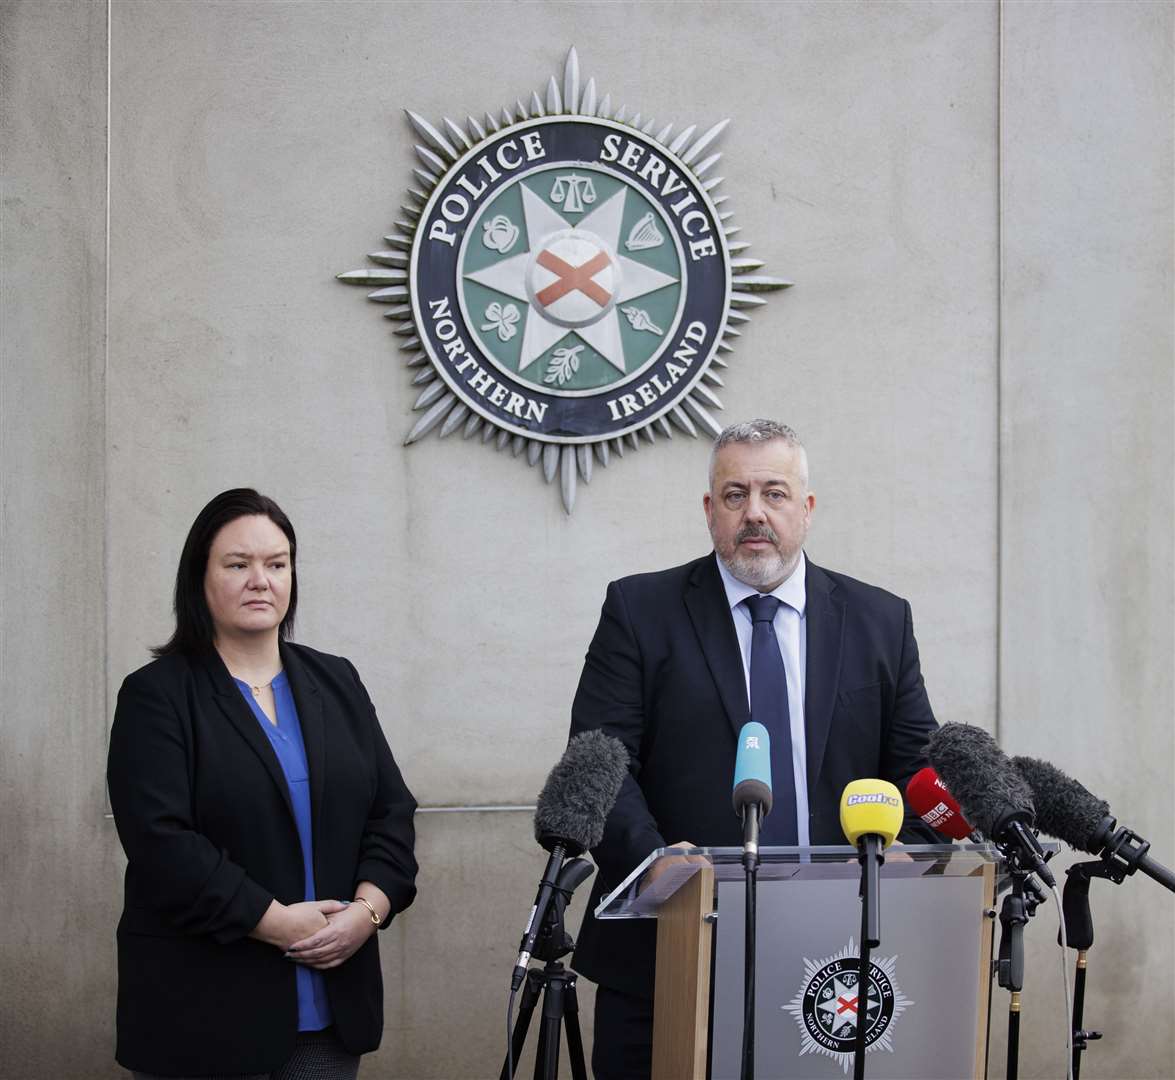 Detective Chief Inspector Neil McGuinness with Detective Inspector Gina Quinn from Police Service of Northern Ireland’s major investigation team, speak to the media at PSNI Headquarters in Belfast (Liam McBurney/PA)